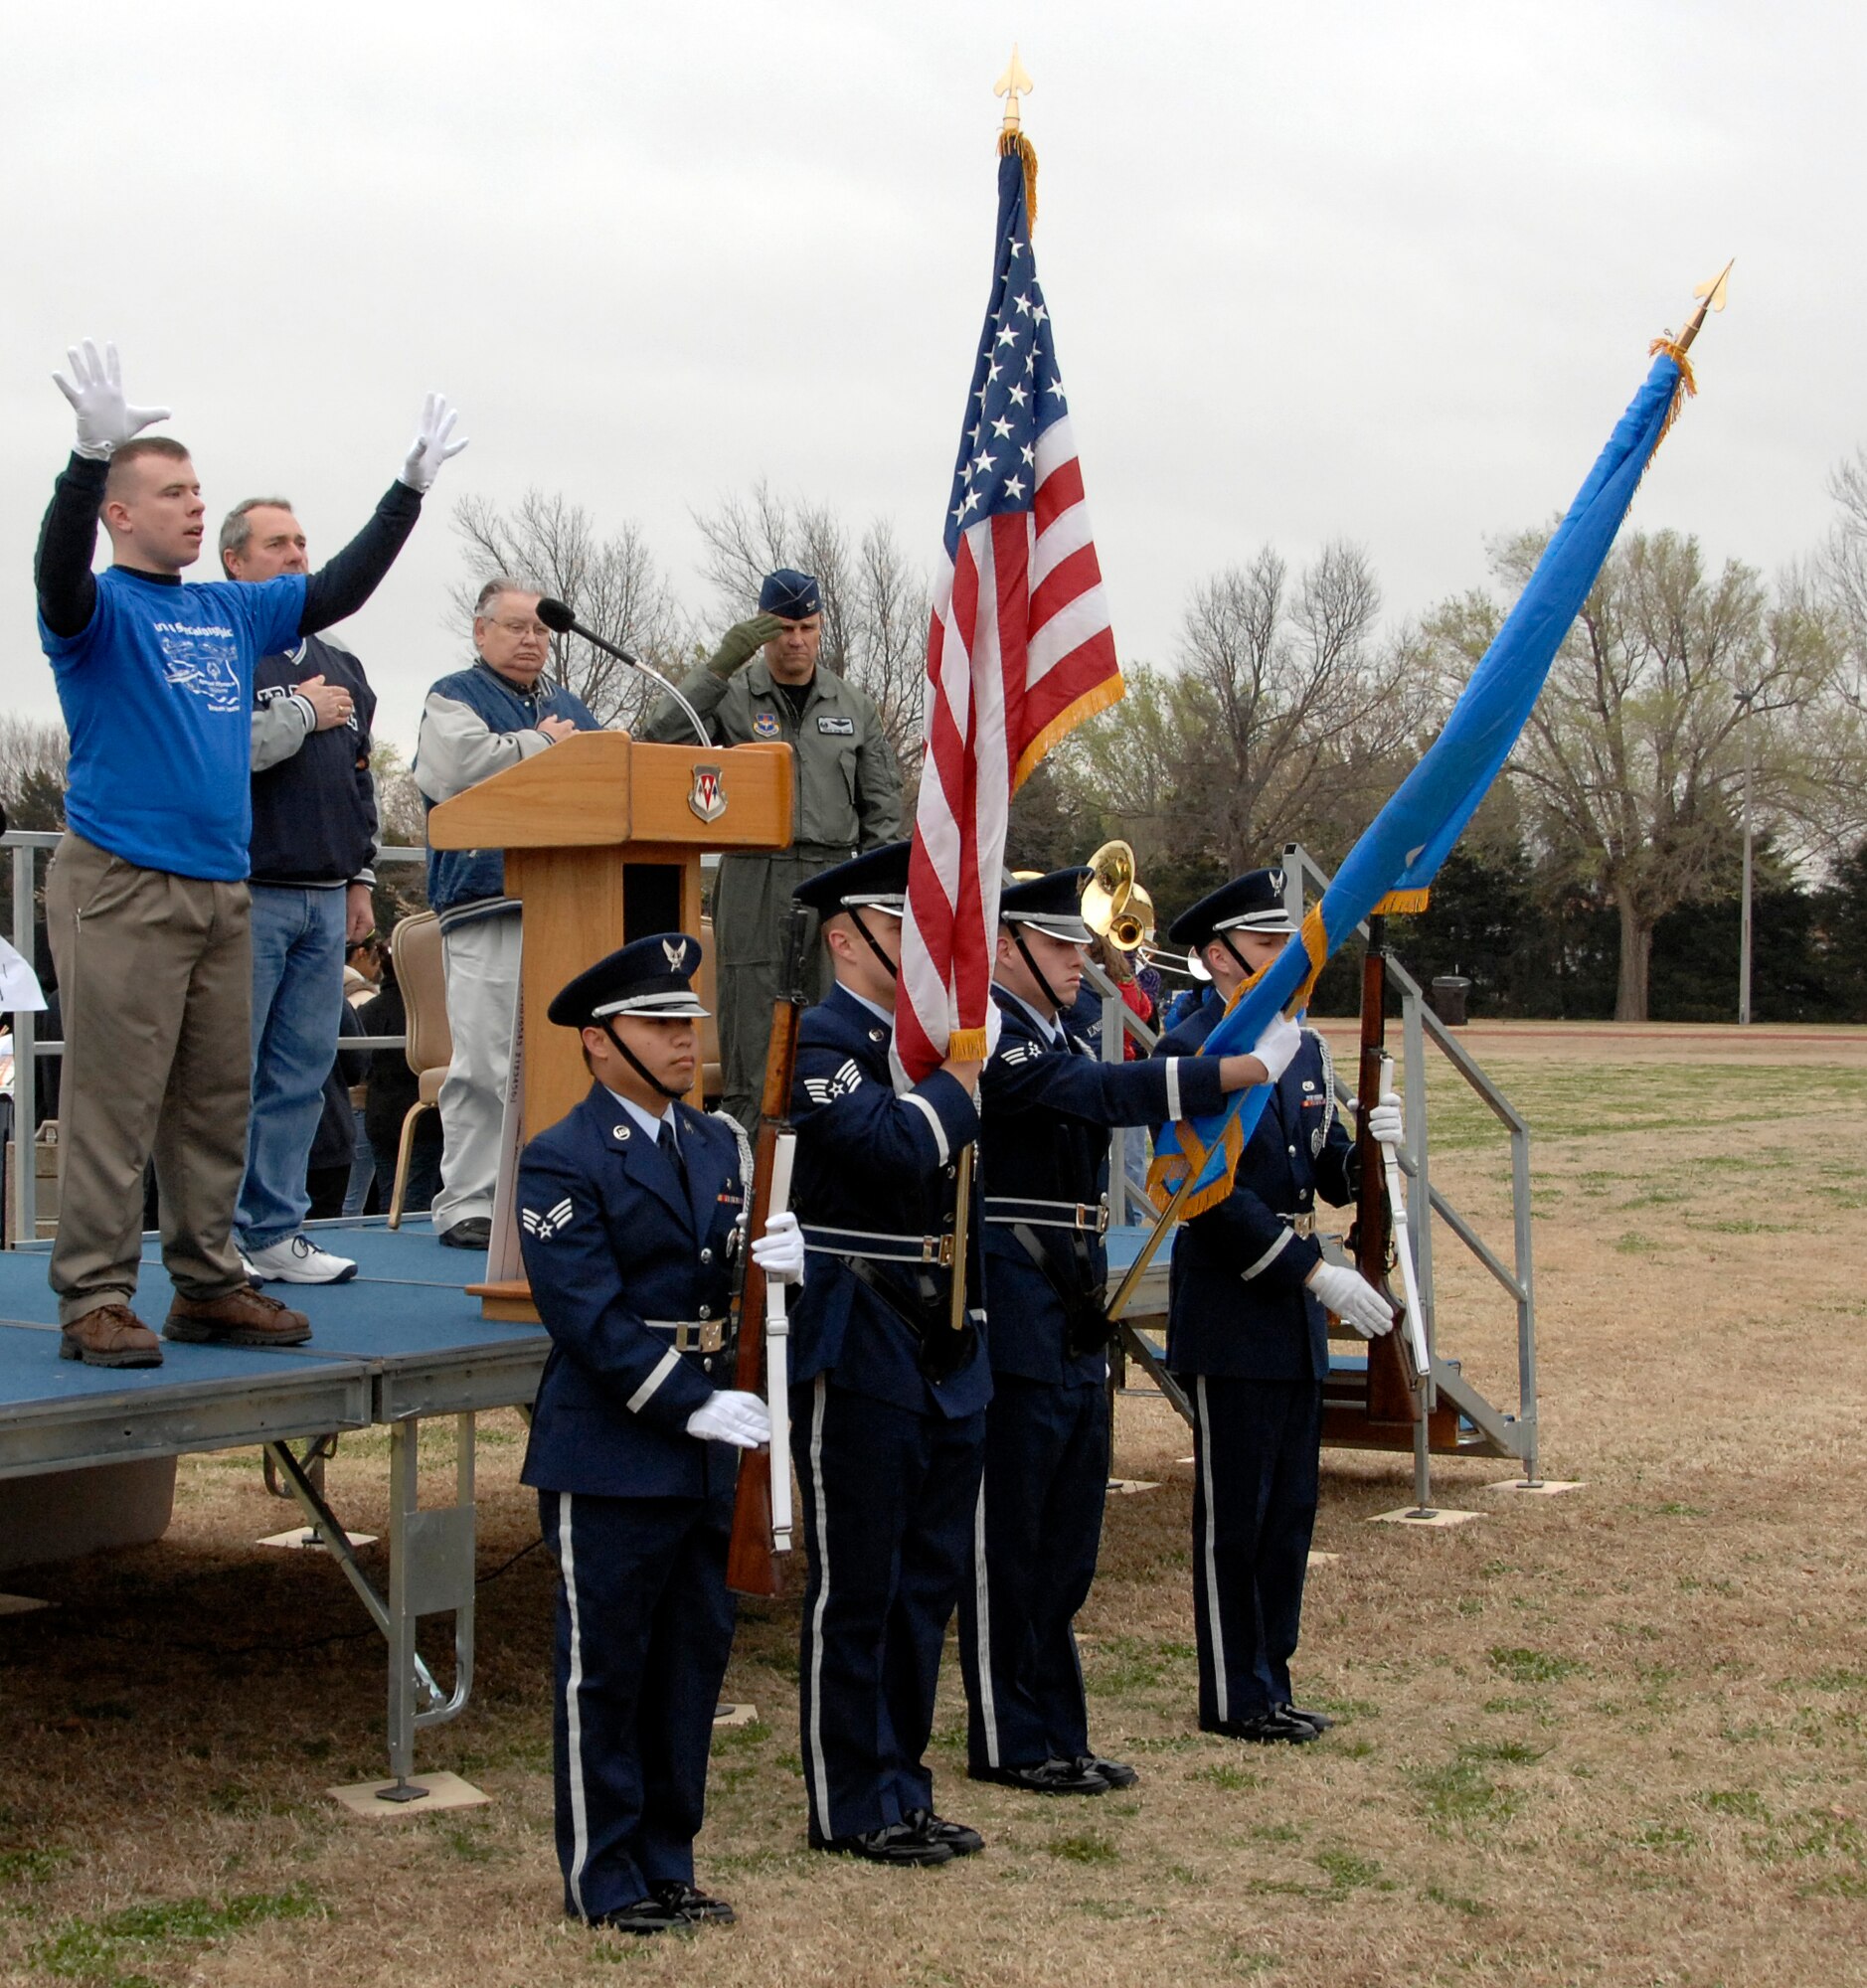 Airman 1st Class Benjamin Ekblad, left with white gloves, performs the national anthem in sign language while the Vance Silver Talon Honor Guard presents the colors during opening ceremonies for the 2009 Cherokee Strip Area 6 Track and Field Athletics meet, also known as the Area 6 Special Olympics, held at Vance March 26. More than 250 Vance Airmen volunteered to assist the 225 athletes compete in 13 events. In the 40-year history of the Area 6 Special Olympics, 20 of the competitions have been held at Vance. (U.S. Air Force photo by Terry Wasson)